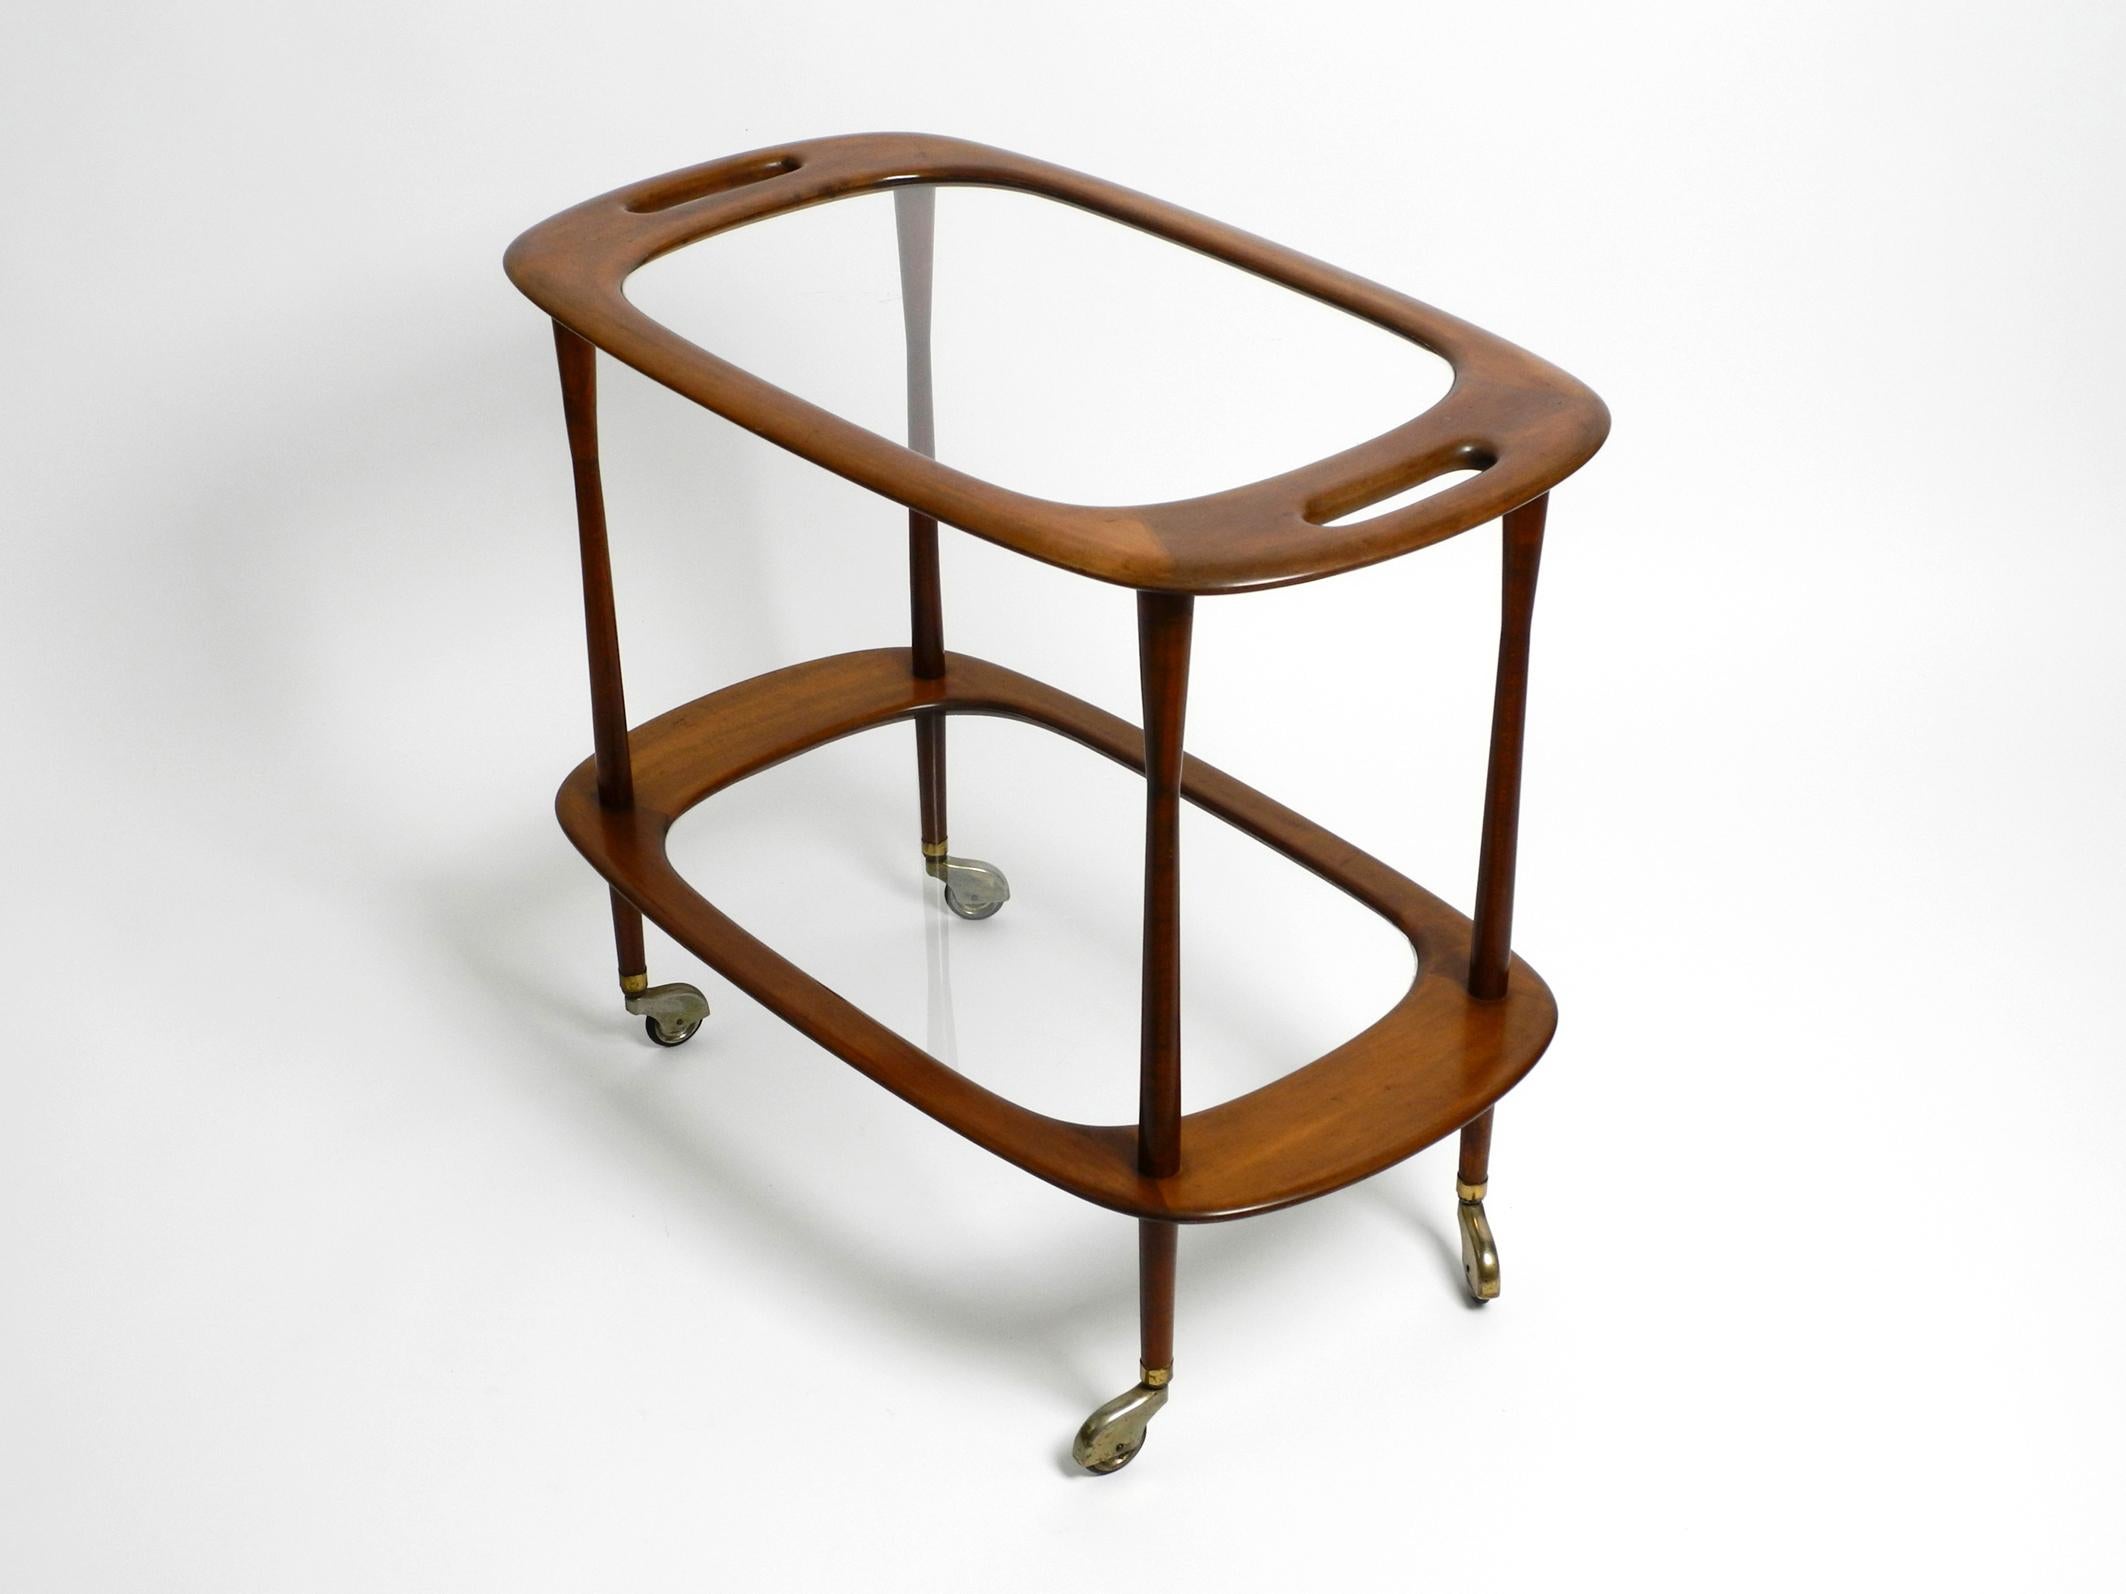 Beautiful Mid Century Modern bar or serving trolley made from walnut and glass.
Designed by the Italian architect and designer Cesare Lacca.
Manufactured by Cassina in the 50's. Great minimalist design. Made in Italy.
This bar cart has no label. But